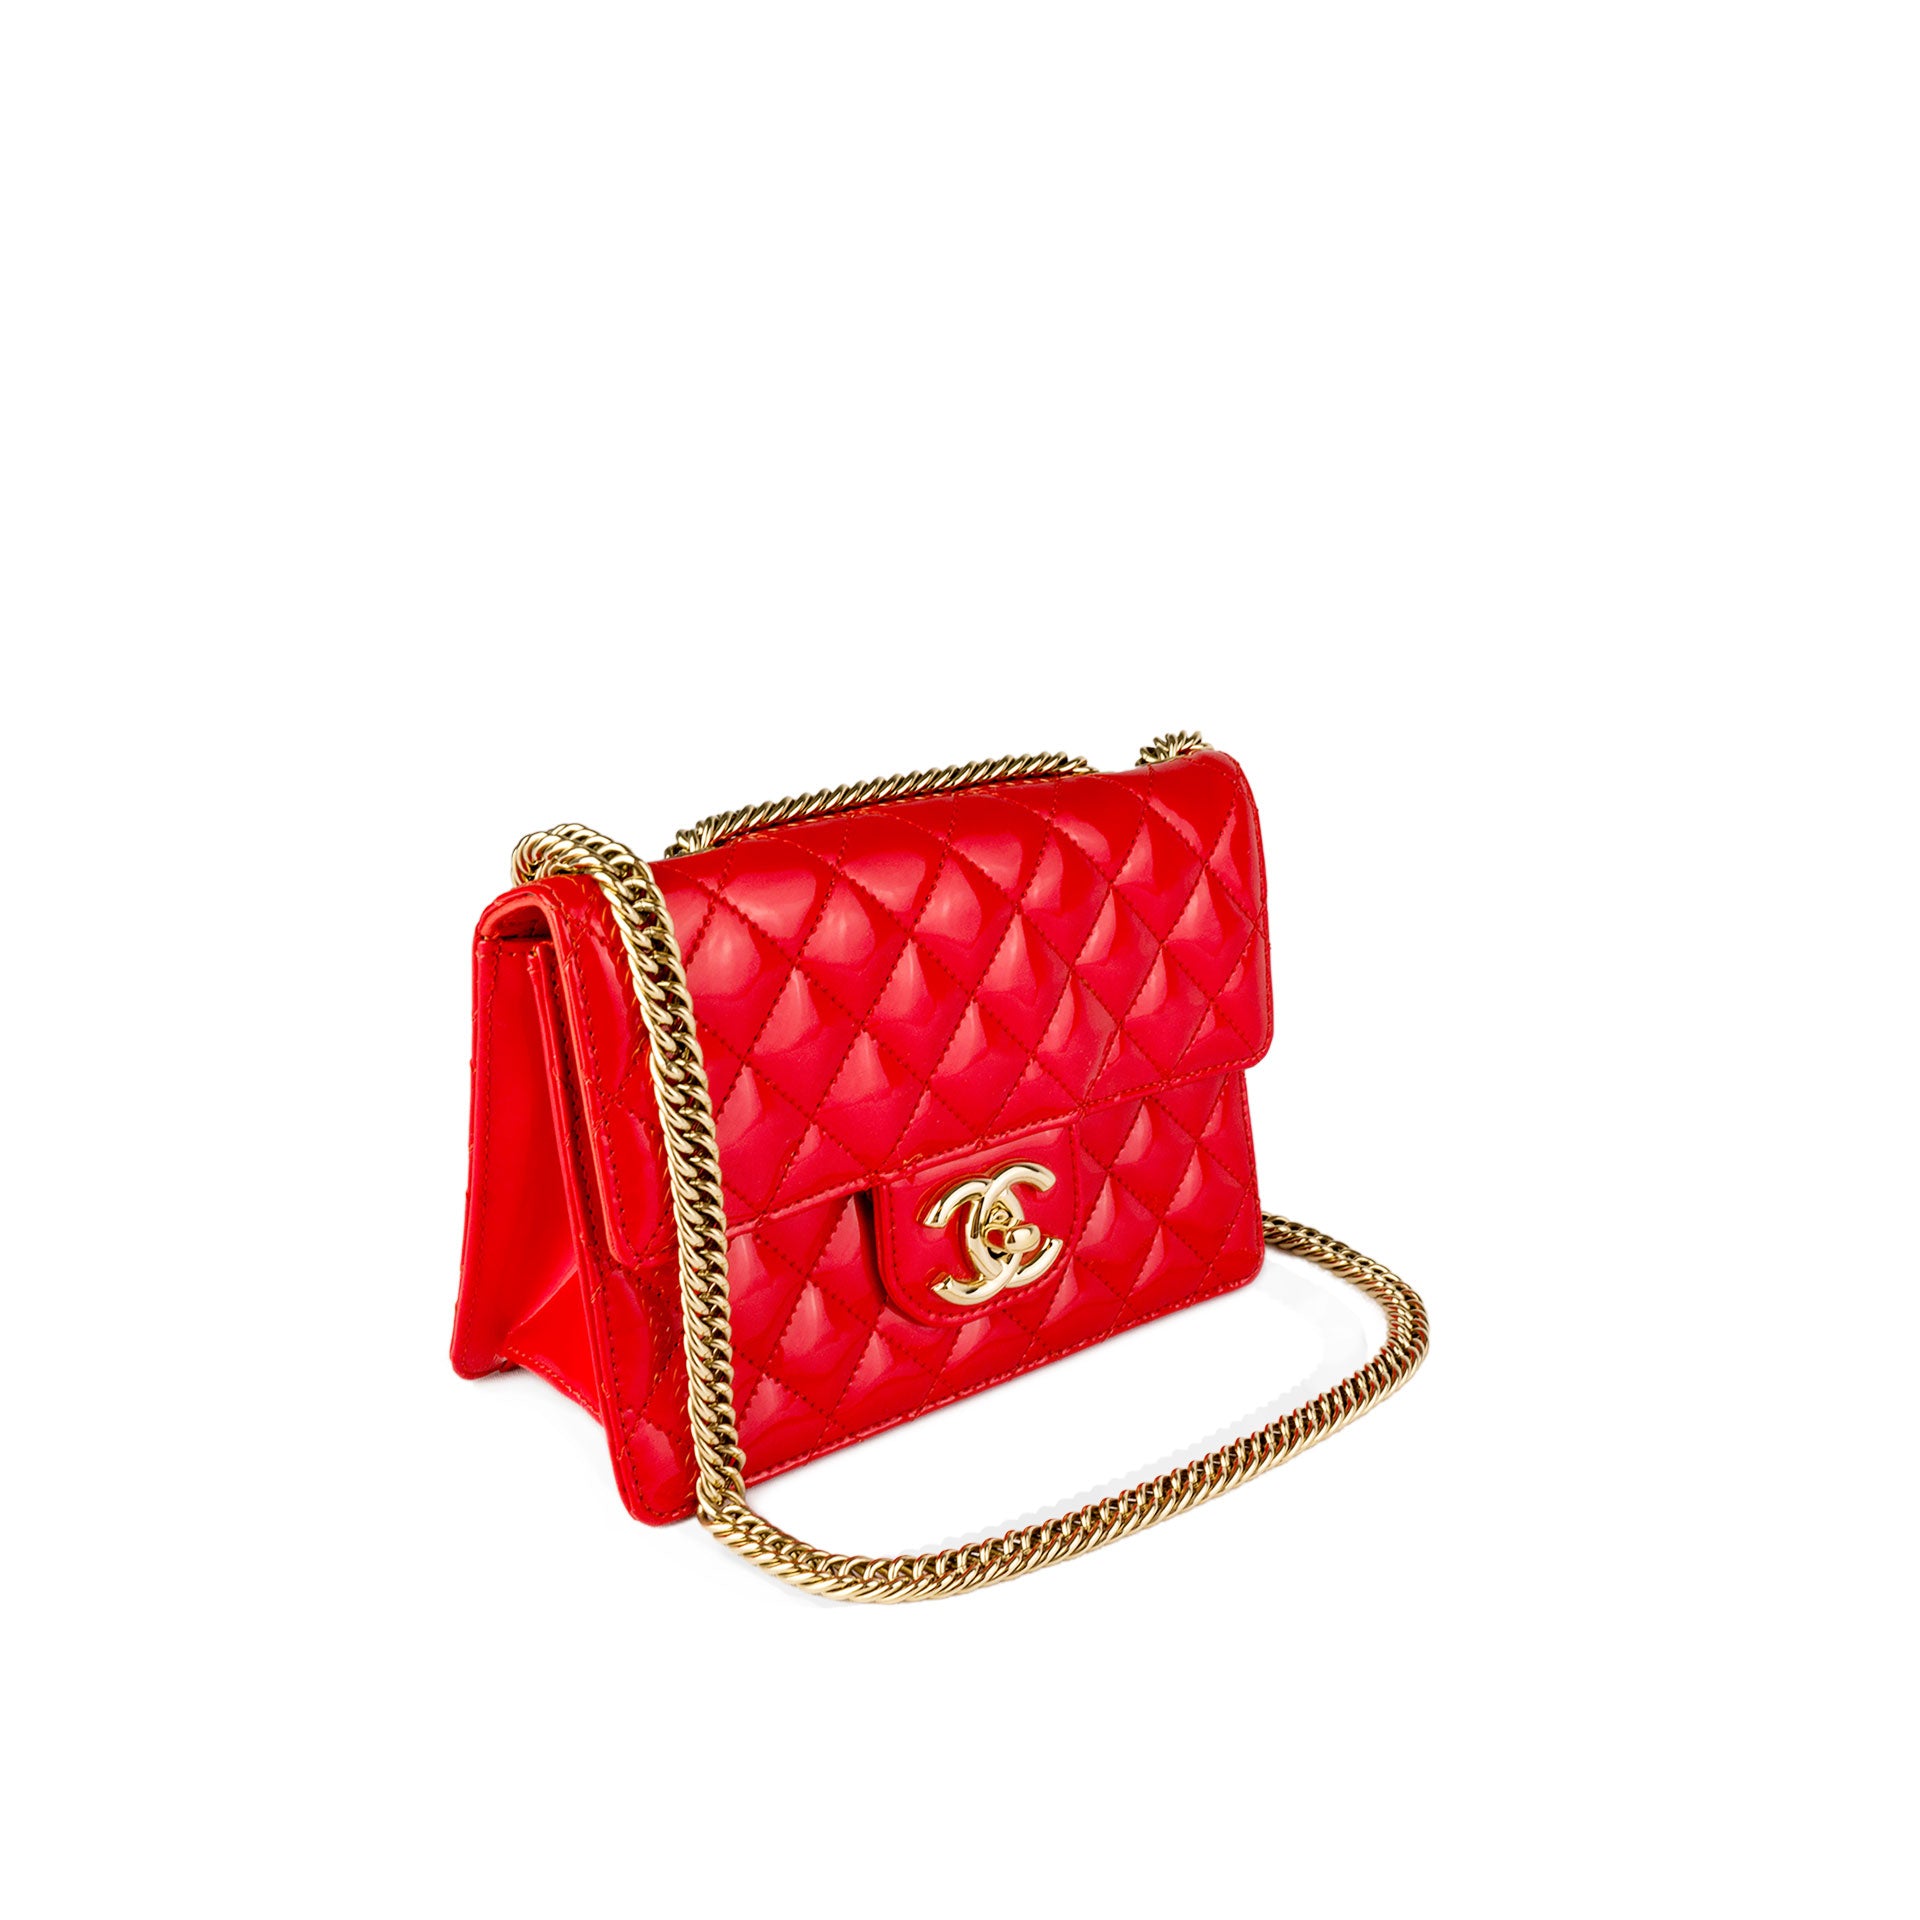 Chanel Pre-owned 1985-1993 Mini Diamond-Quilted Flap Pouch - Red